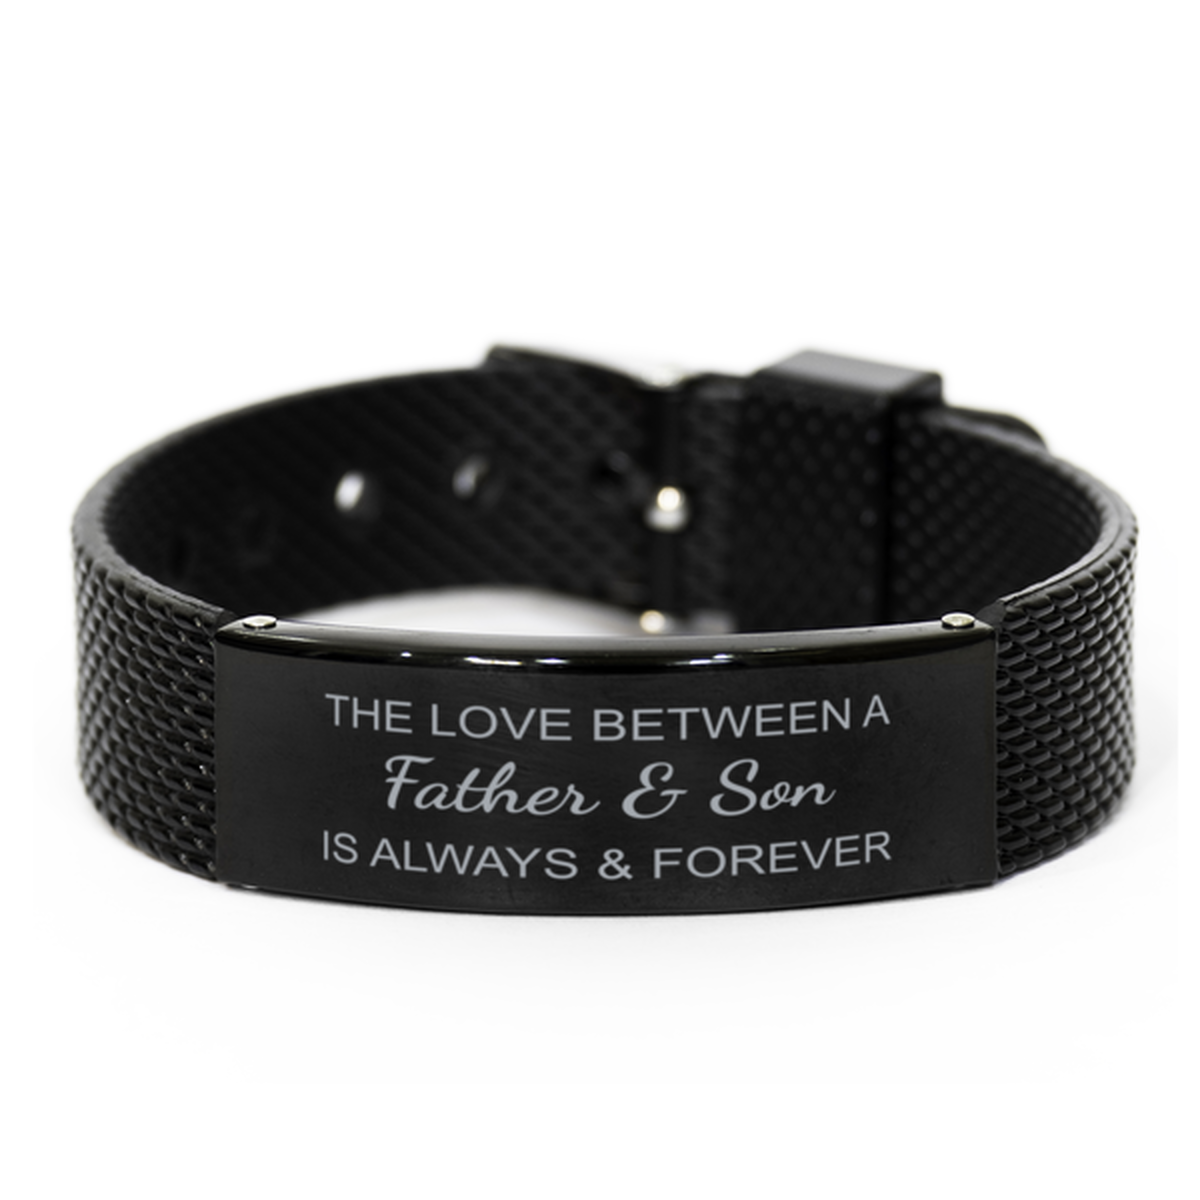 The Love Between a Father and Son is Always and Forever Bracelet, Father Son Bracelet, Black Stainless Steel Leather Bracelet, Christmas.